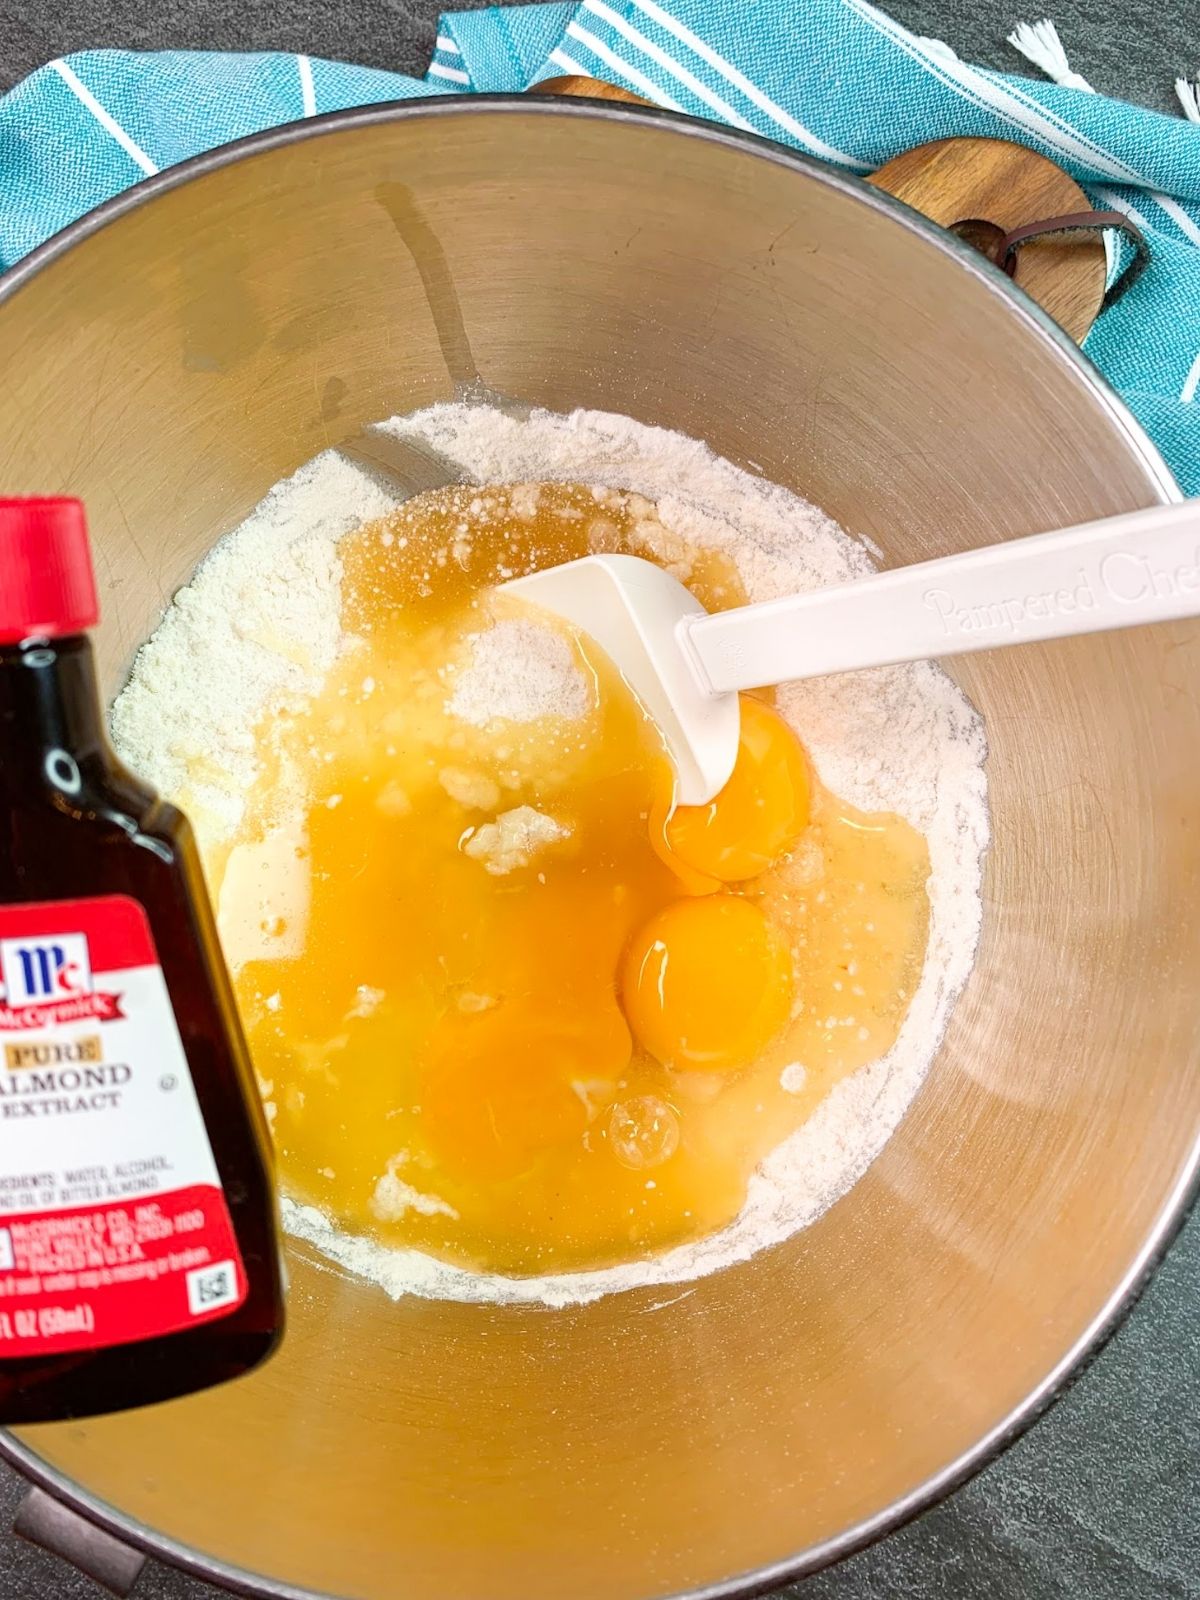 Add almond extract to cake mix batter.